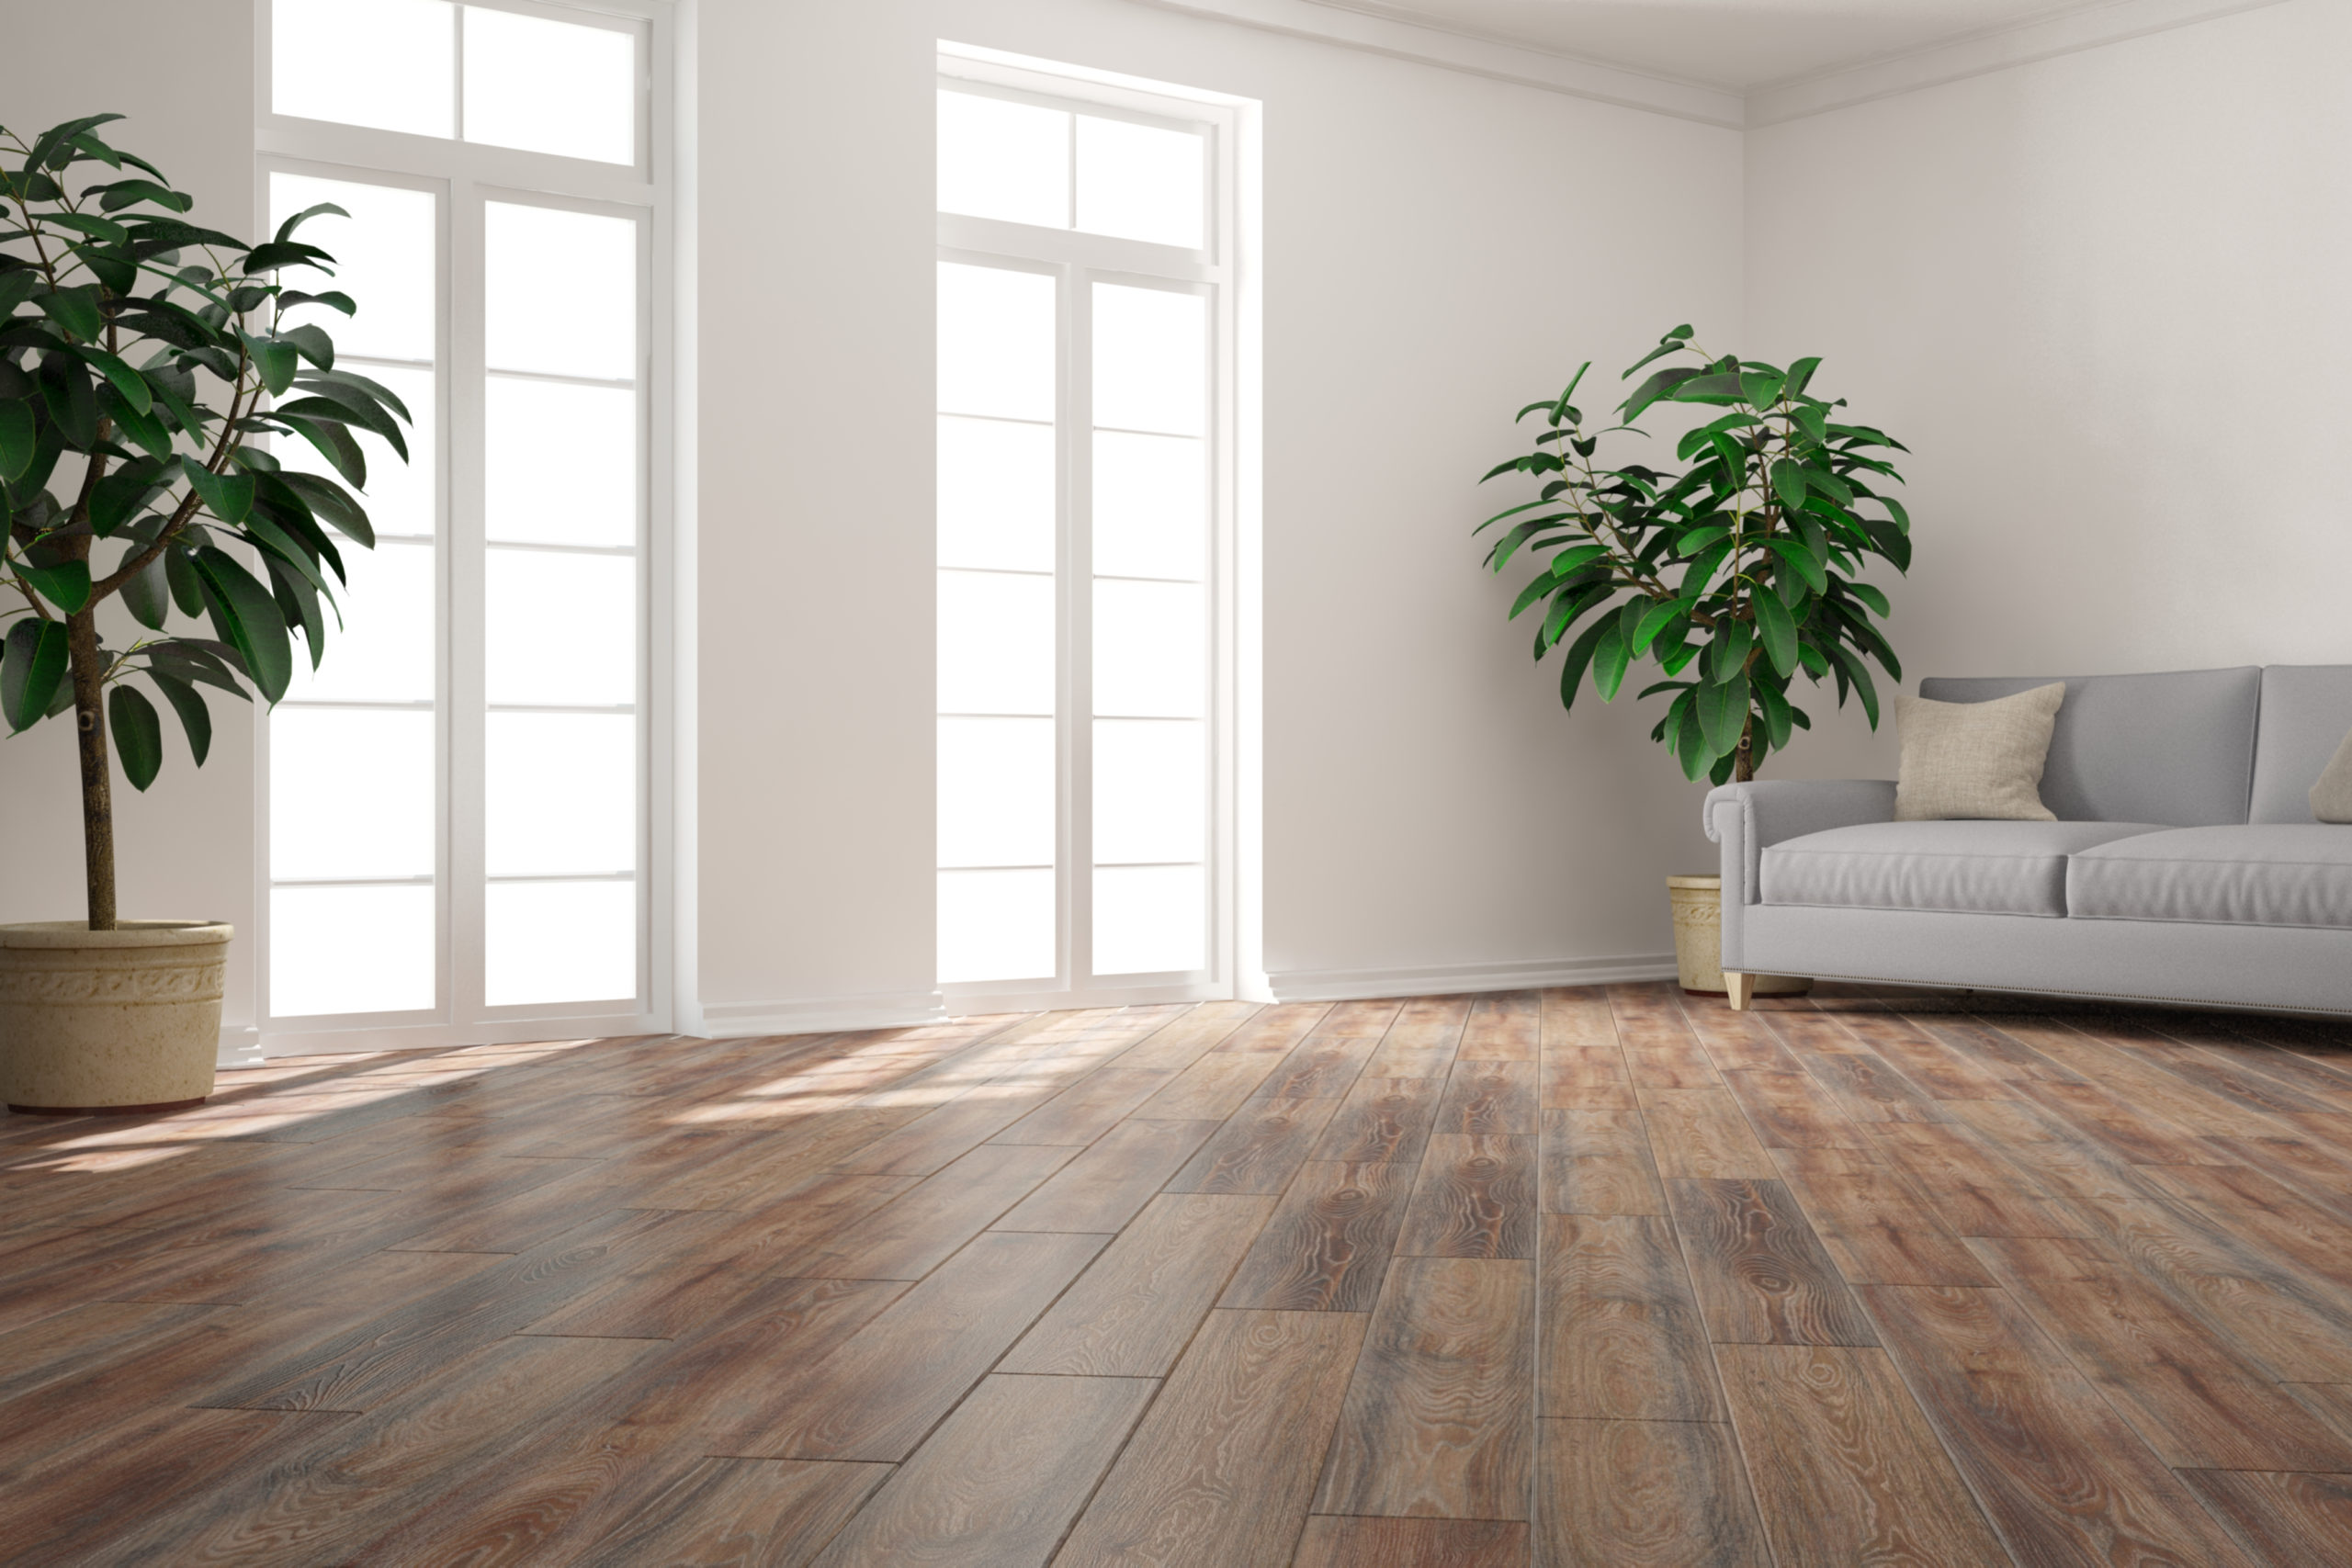 Armstrong Laminate Flooring Review, Armstrong Laminate Flooring Review Australia